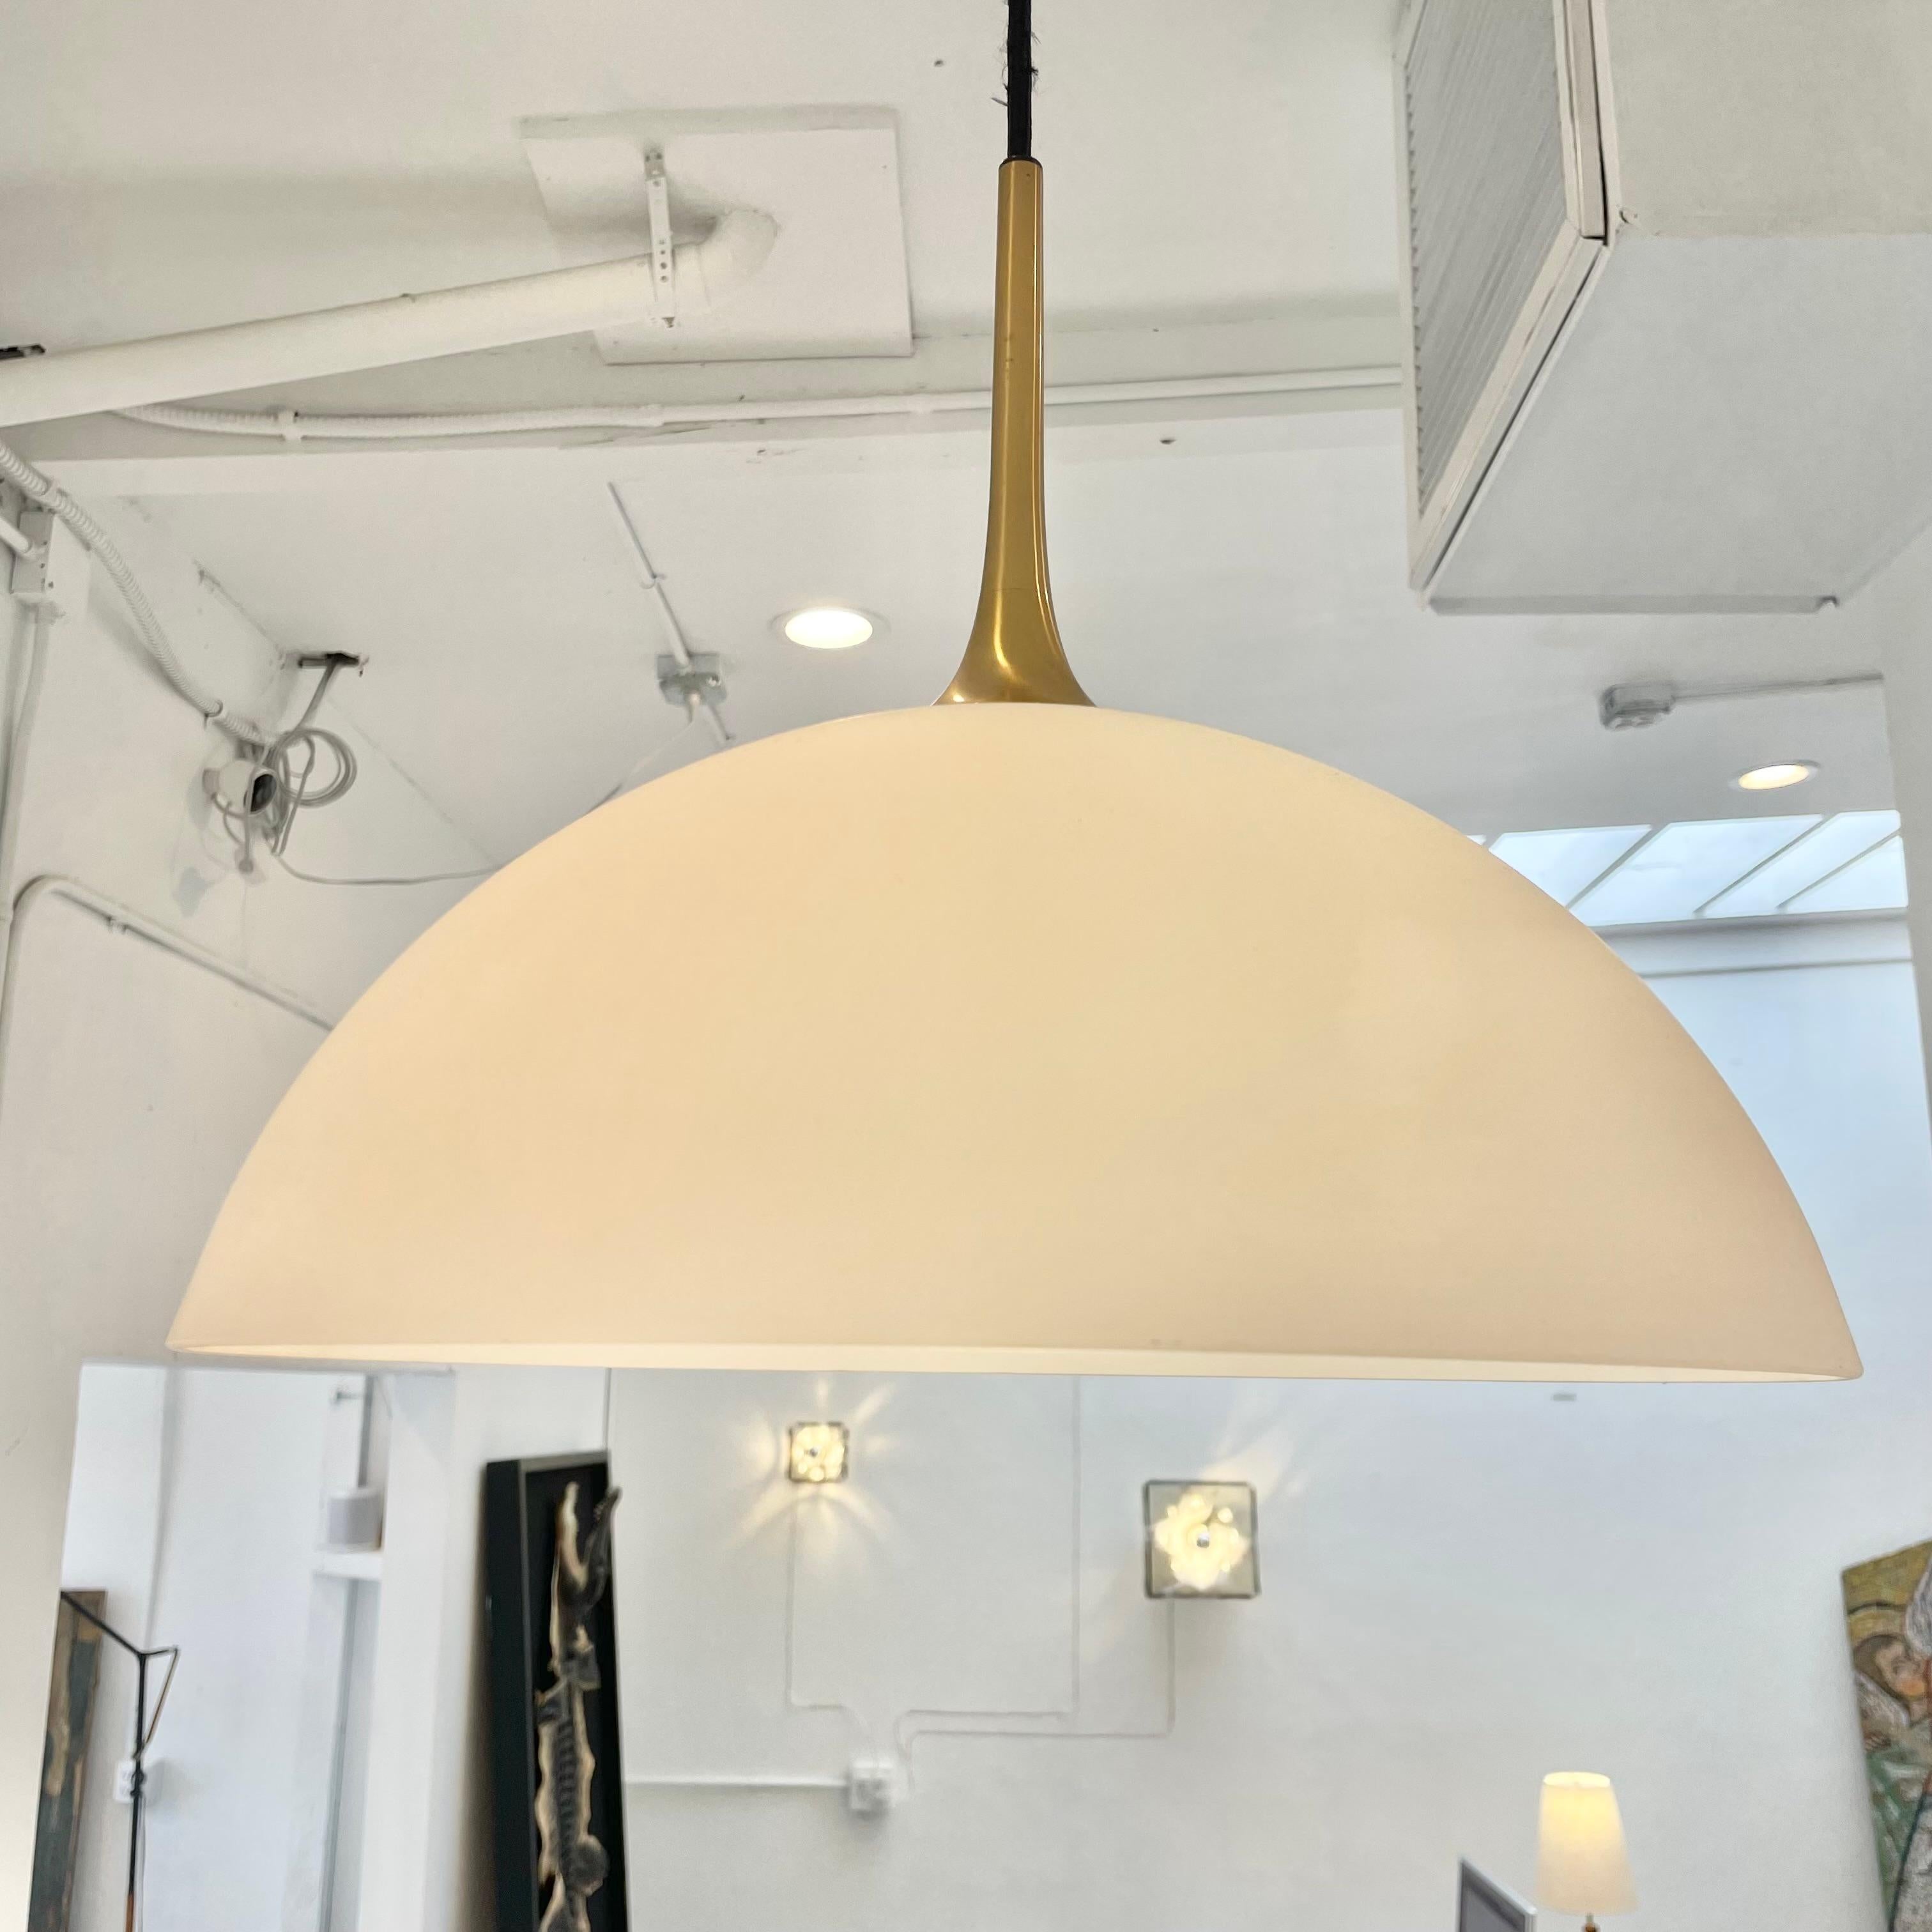 Late 20th Century Florian Schulz Counter Balance Pendant with Frosted Glass Shade, 1970s Germany For Sale